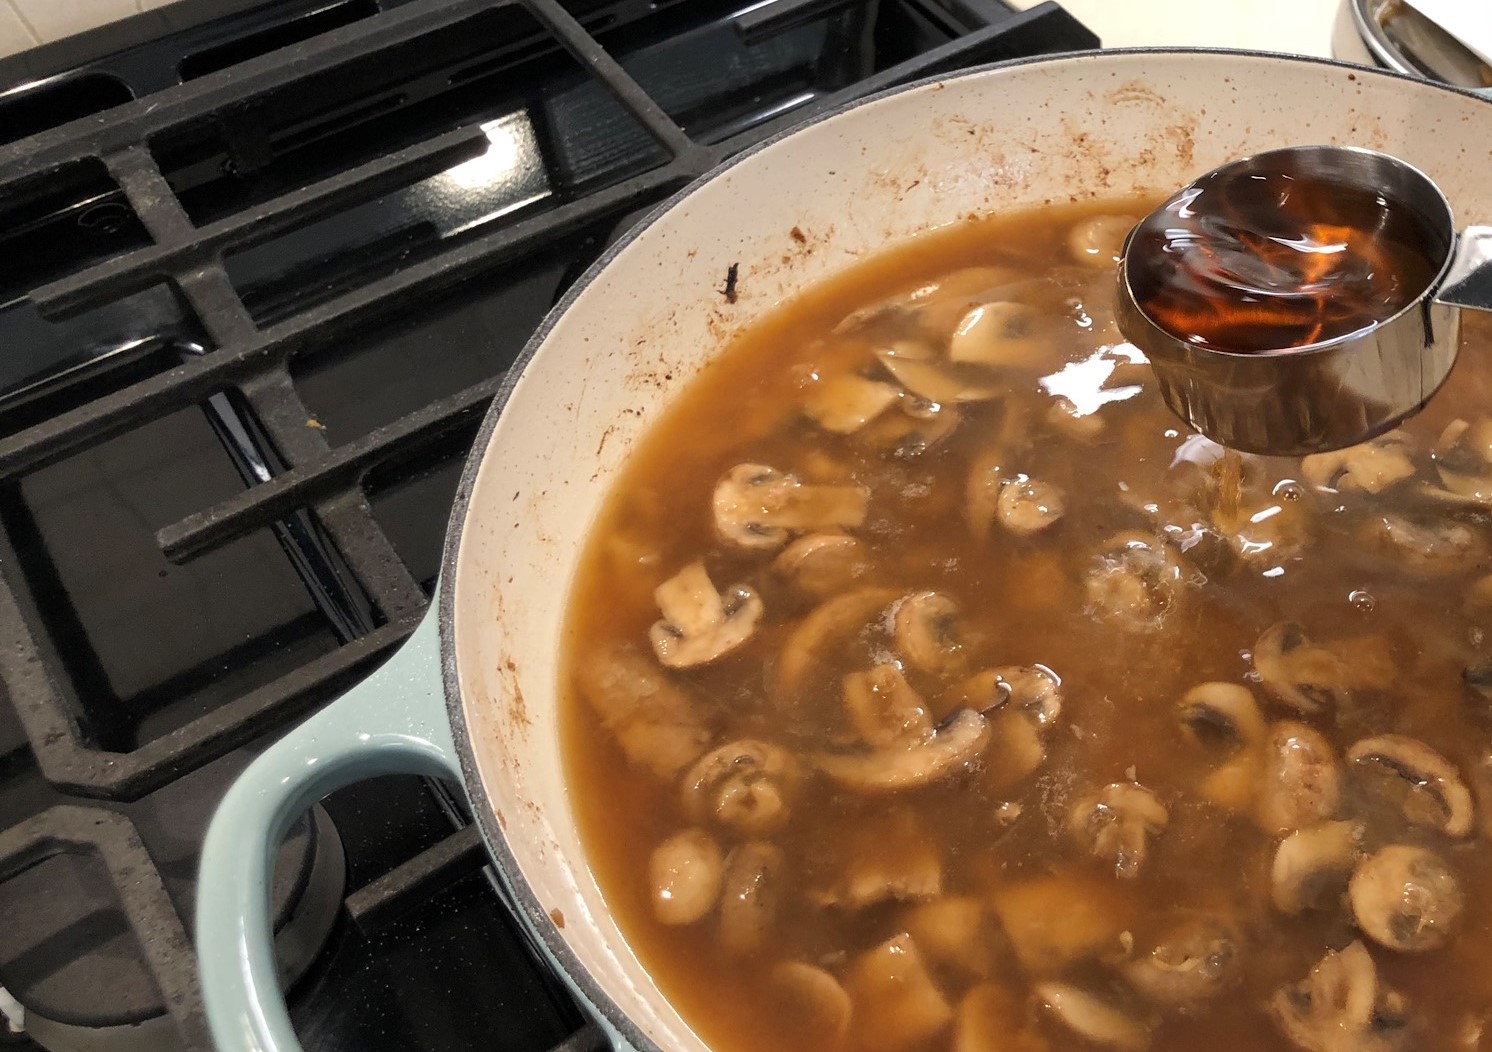 Adding One-Third Cup of Brandy to Beef Stroganoff